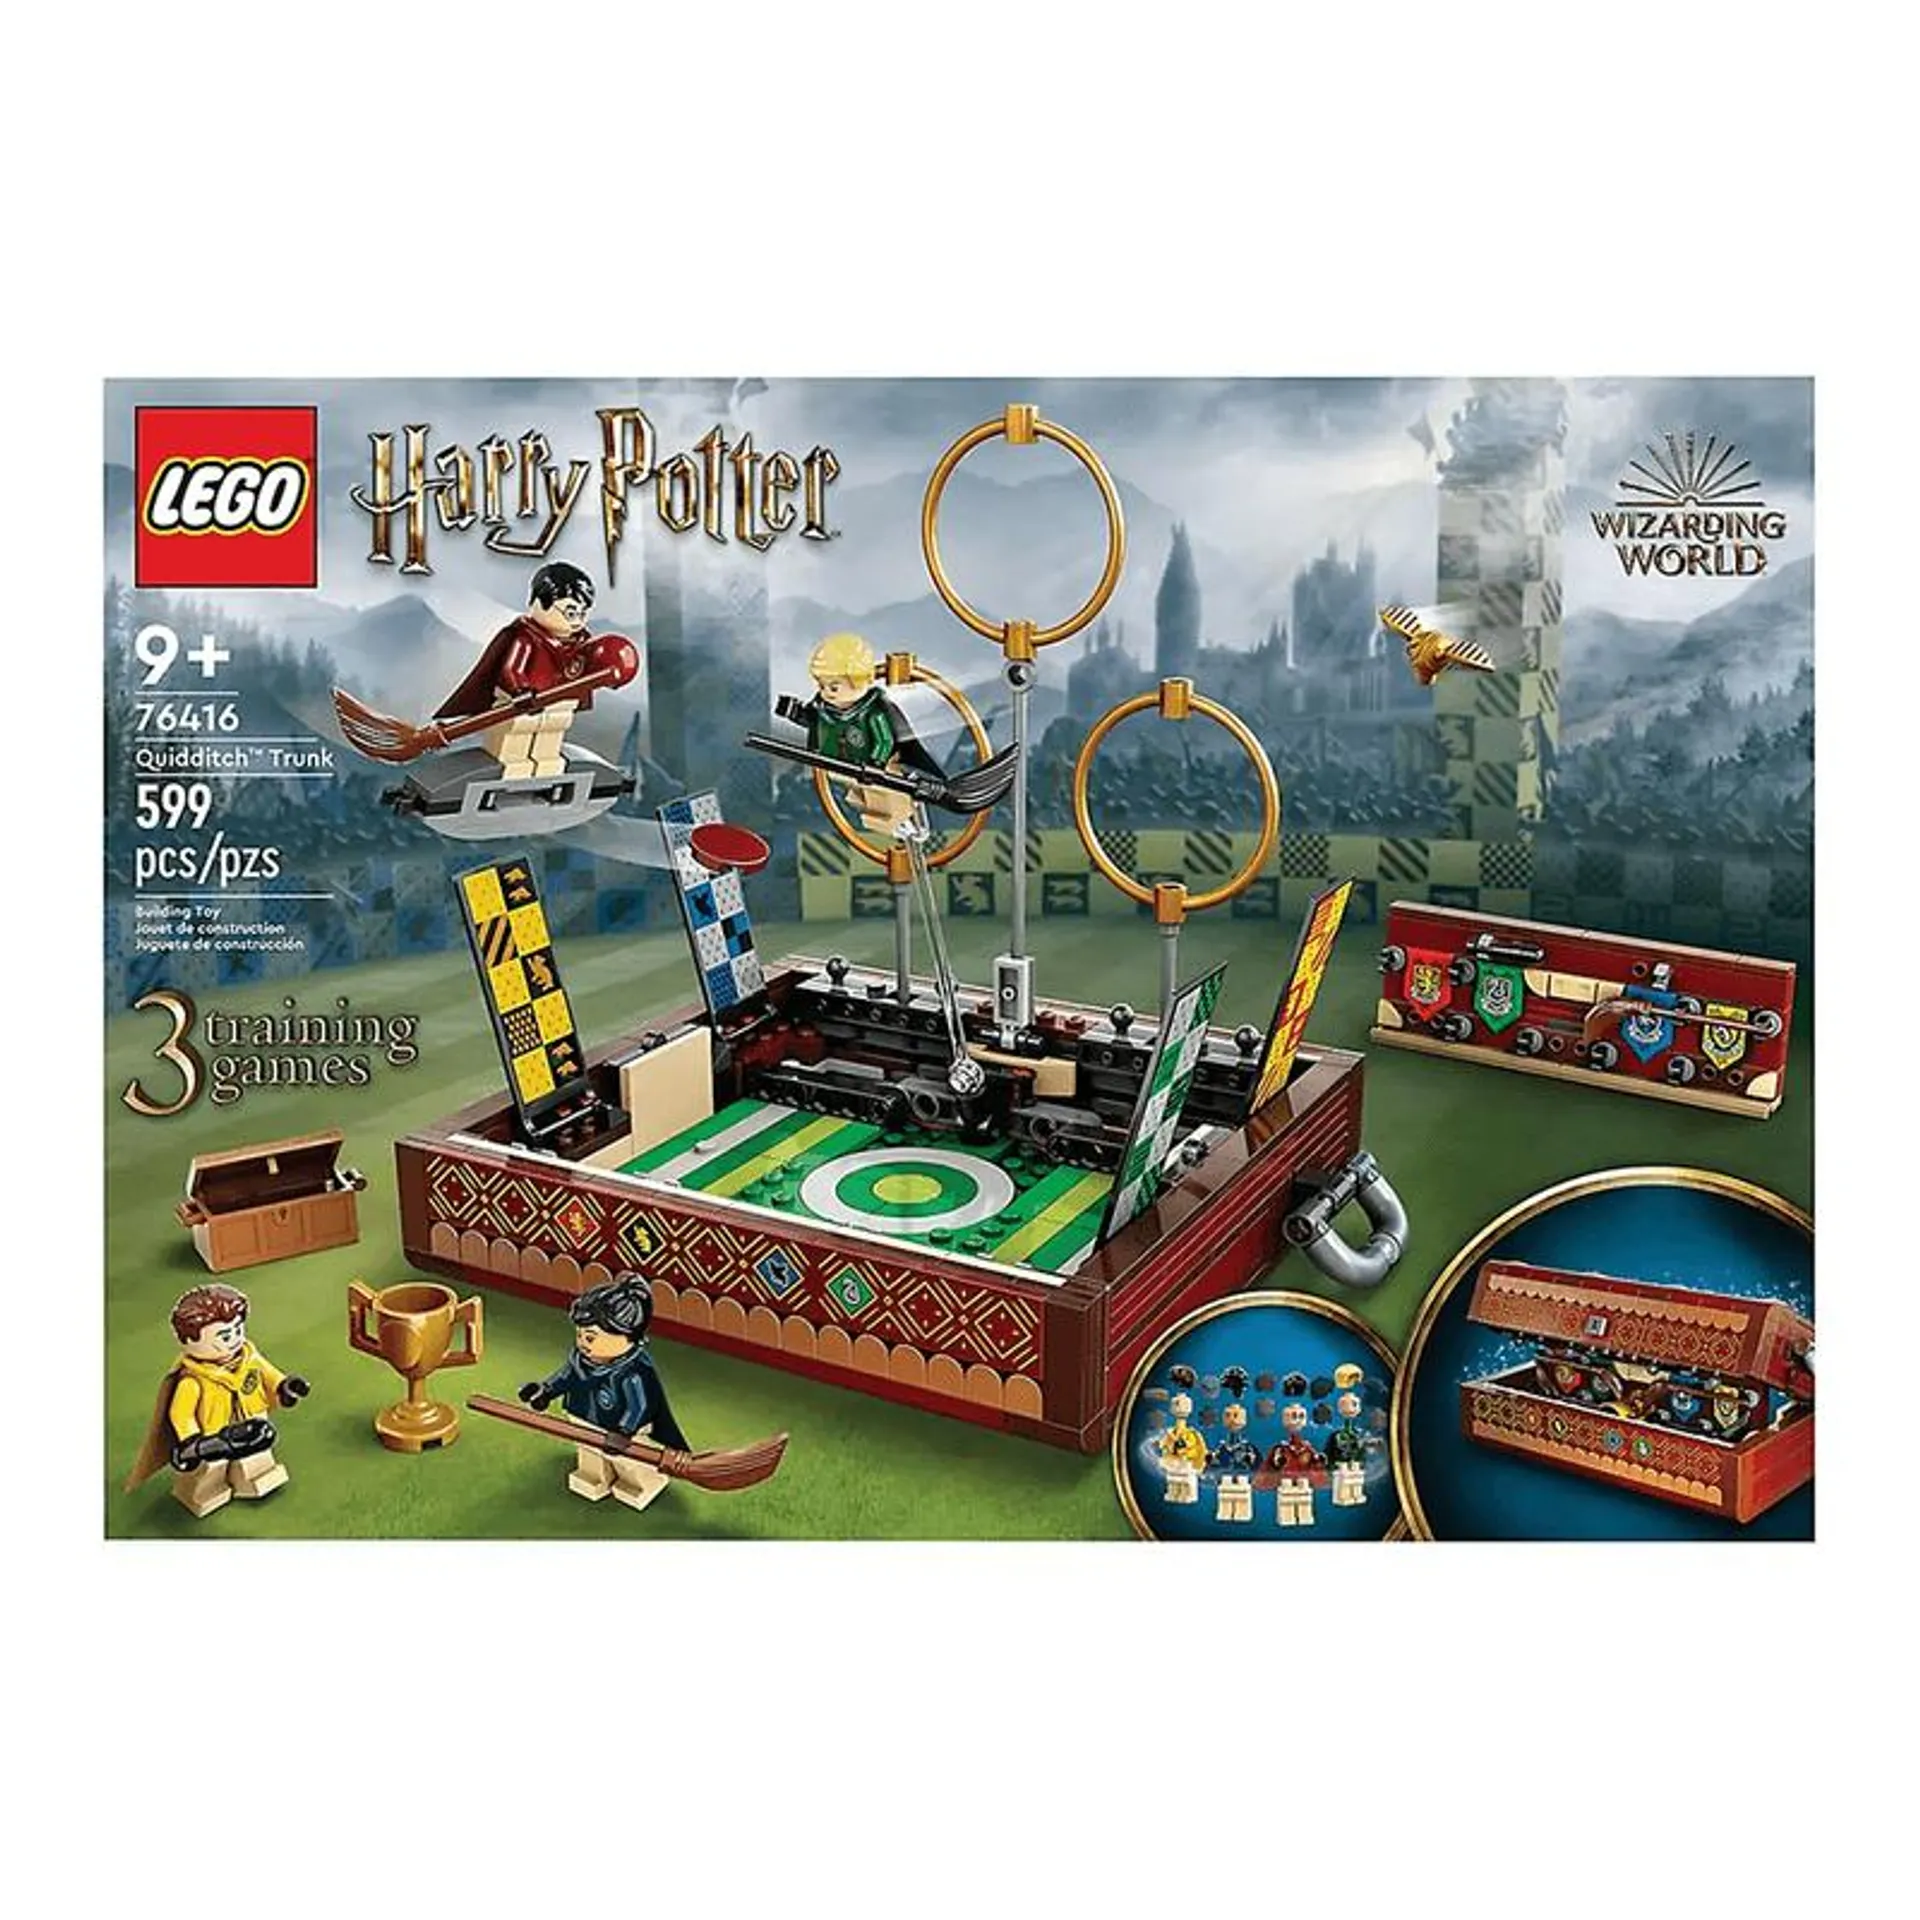 Lego Harry Potter Quidditch Trunk Lego LE76416